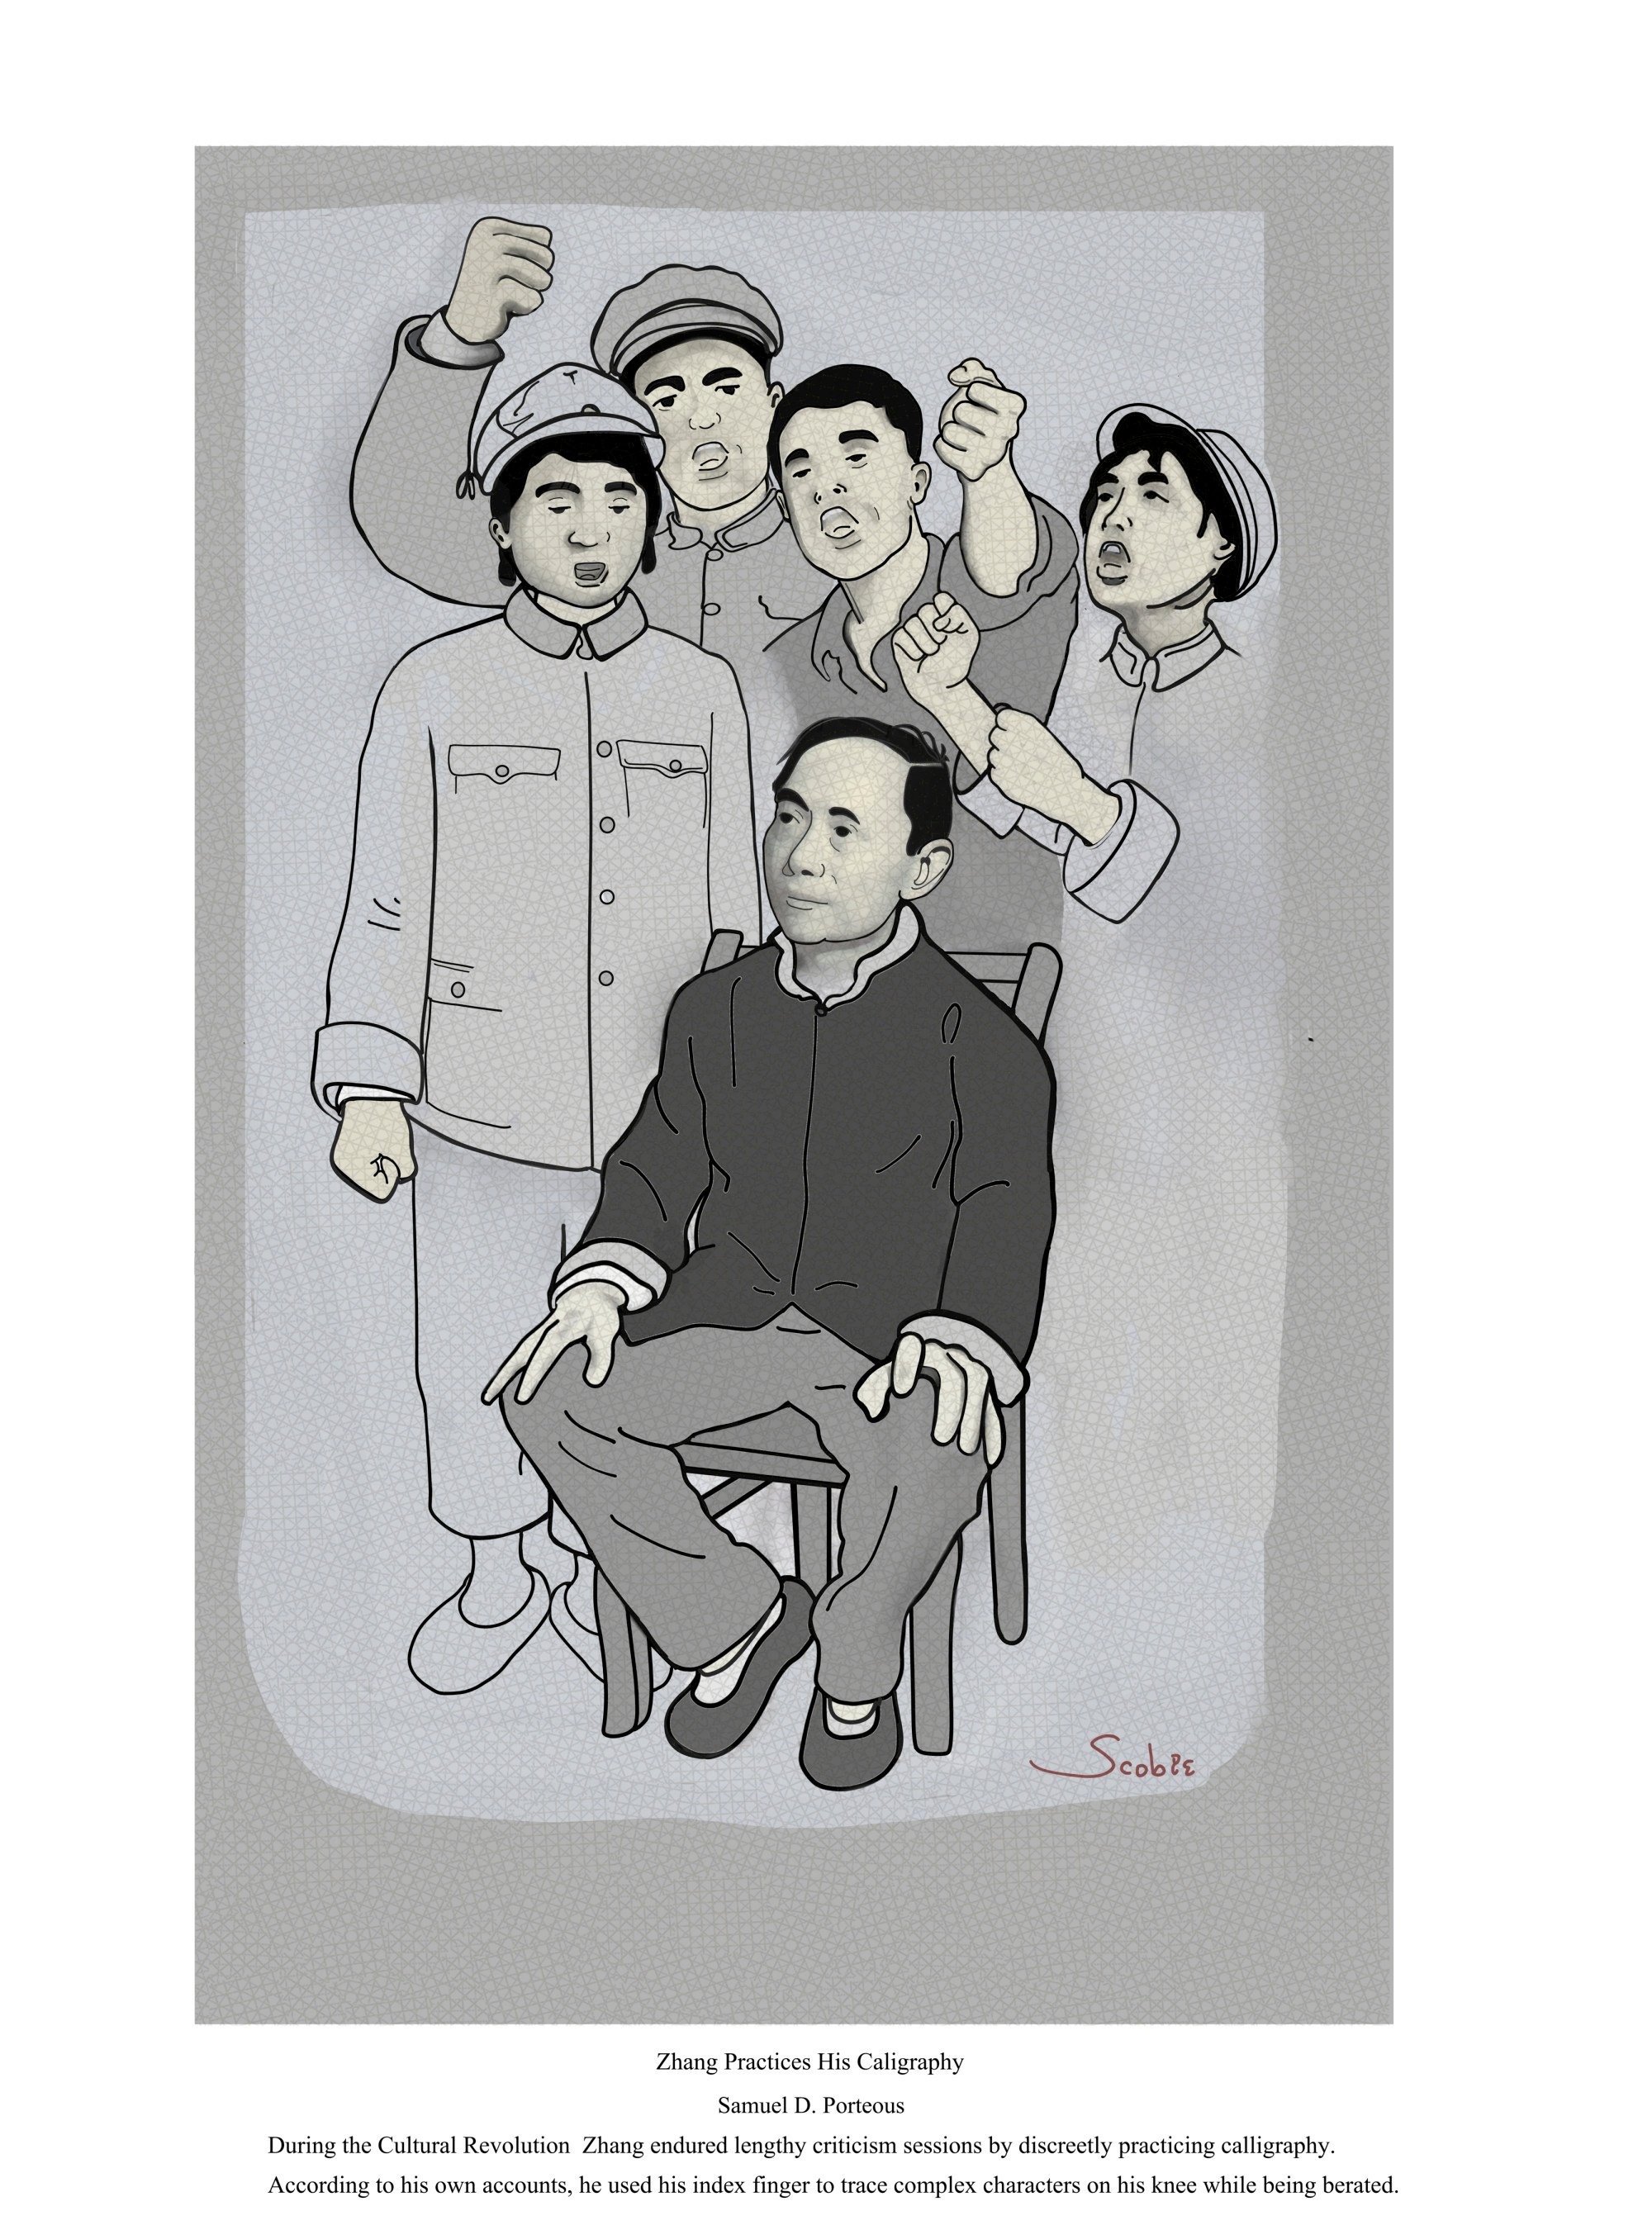 Zhang during the Cultural Revolution enduring the criticism sessions by discreetly practising his calligraphy while being berated. Illustration: Samuel Porteous